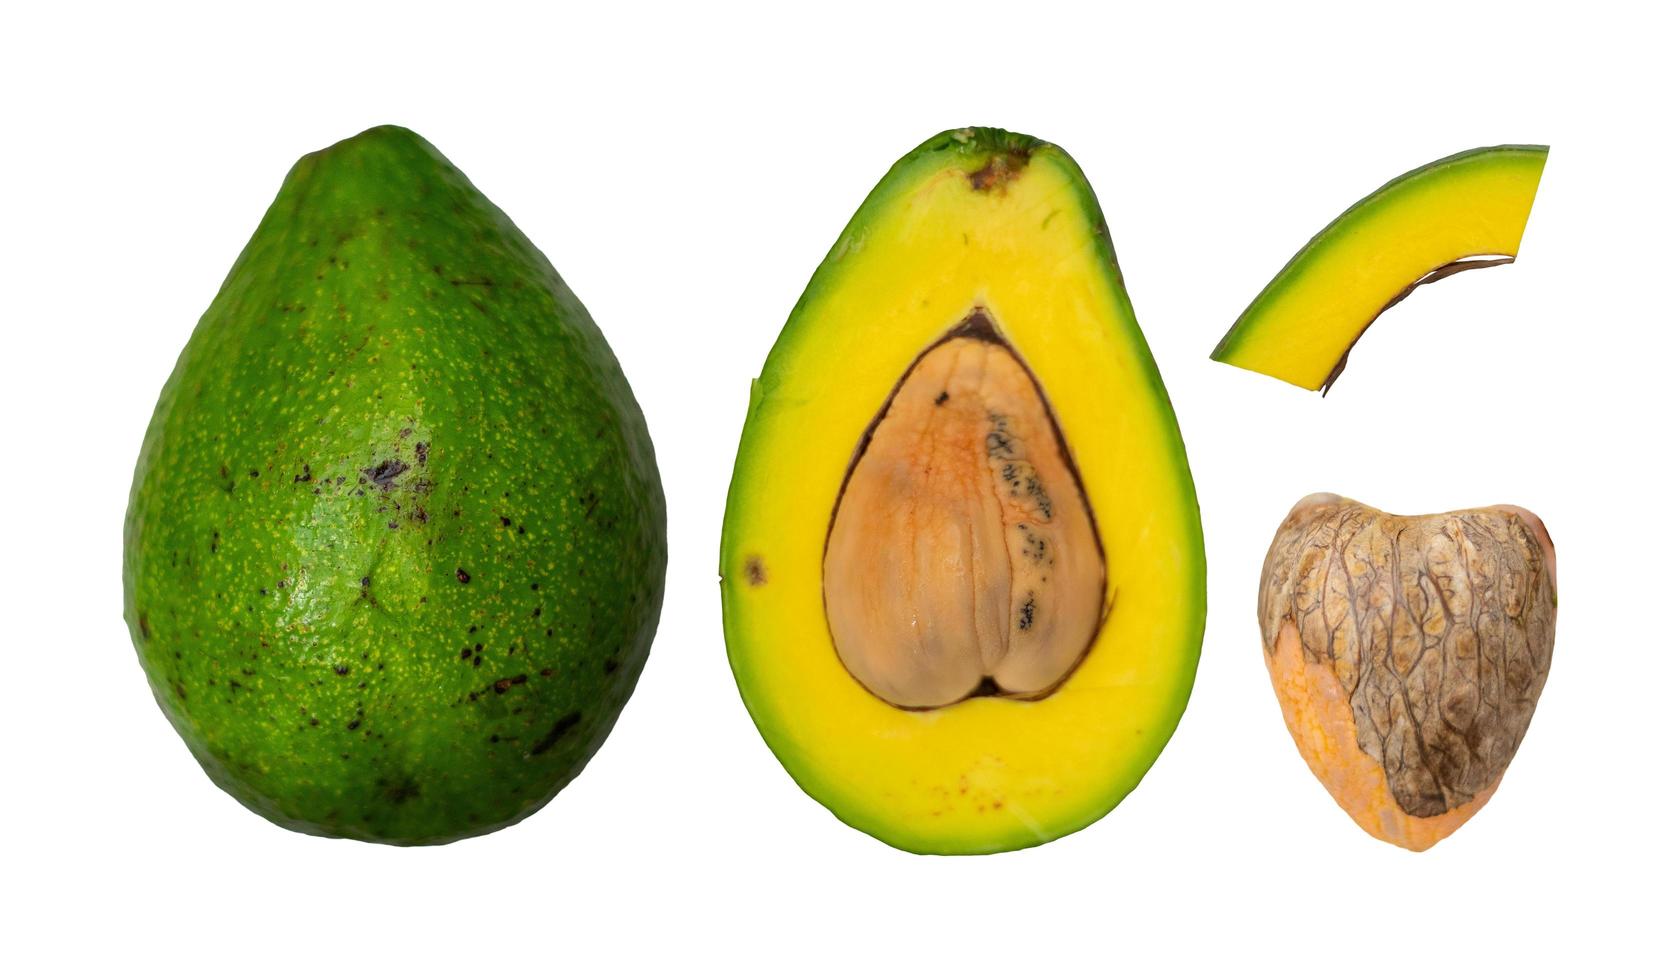 Avocado composition for background design. Tropical fruit styled into patterns for wallpaper photo